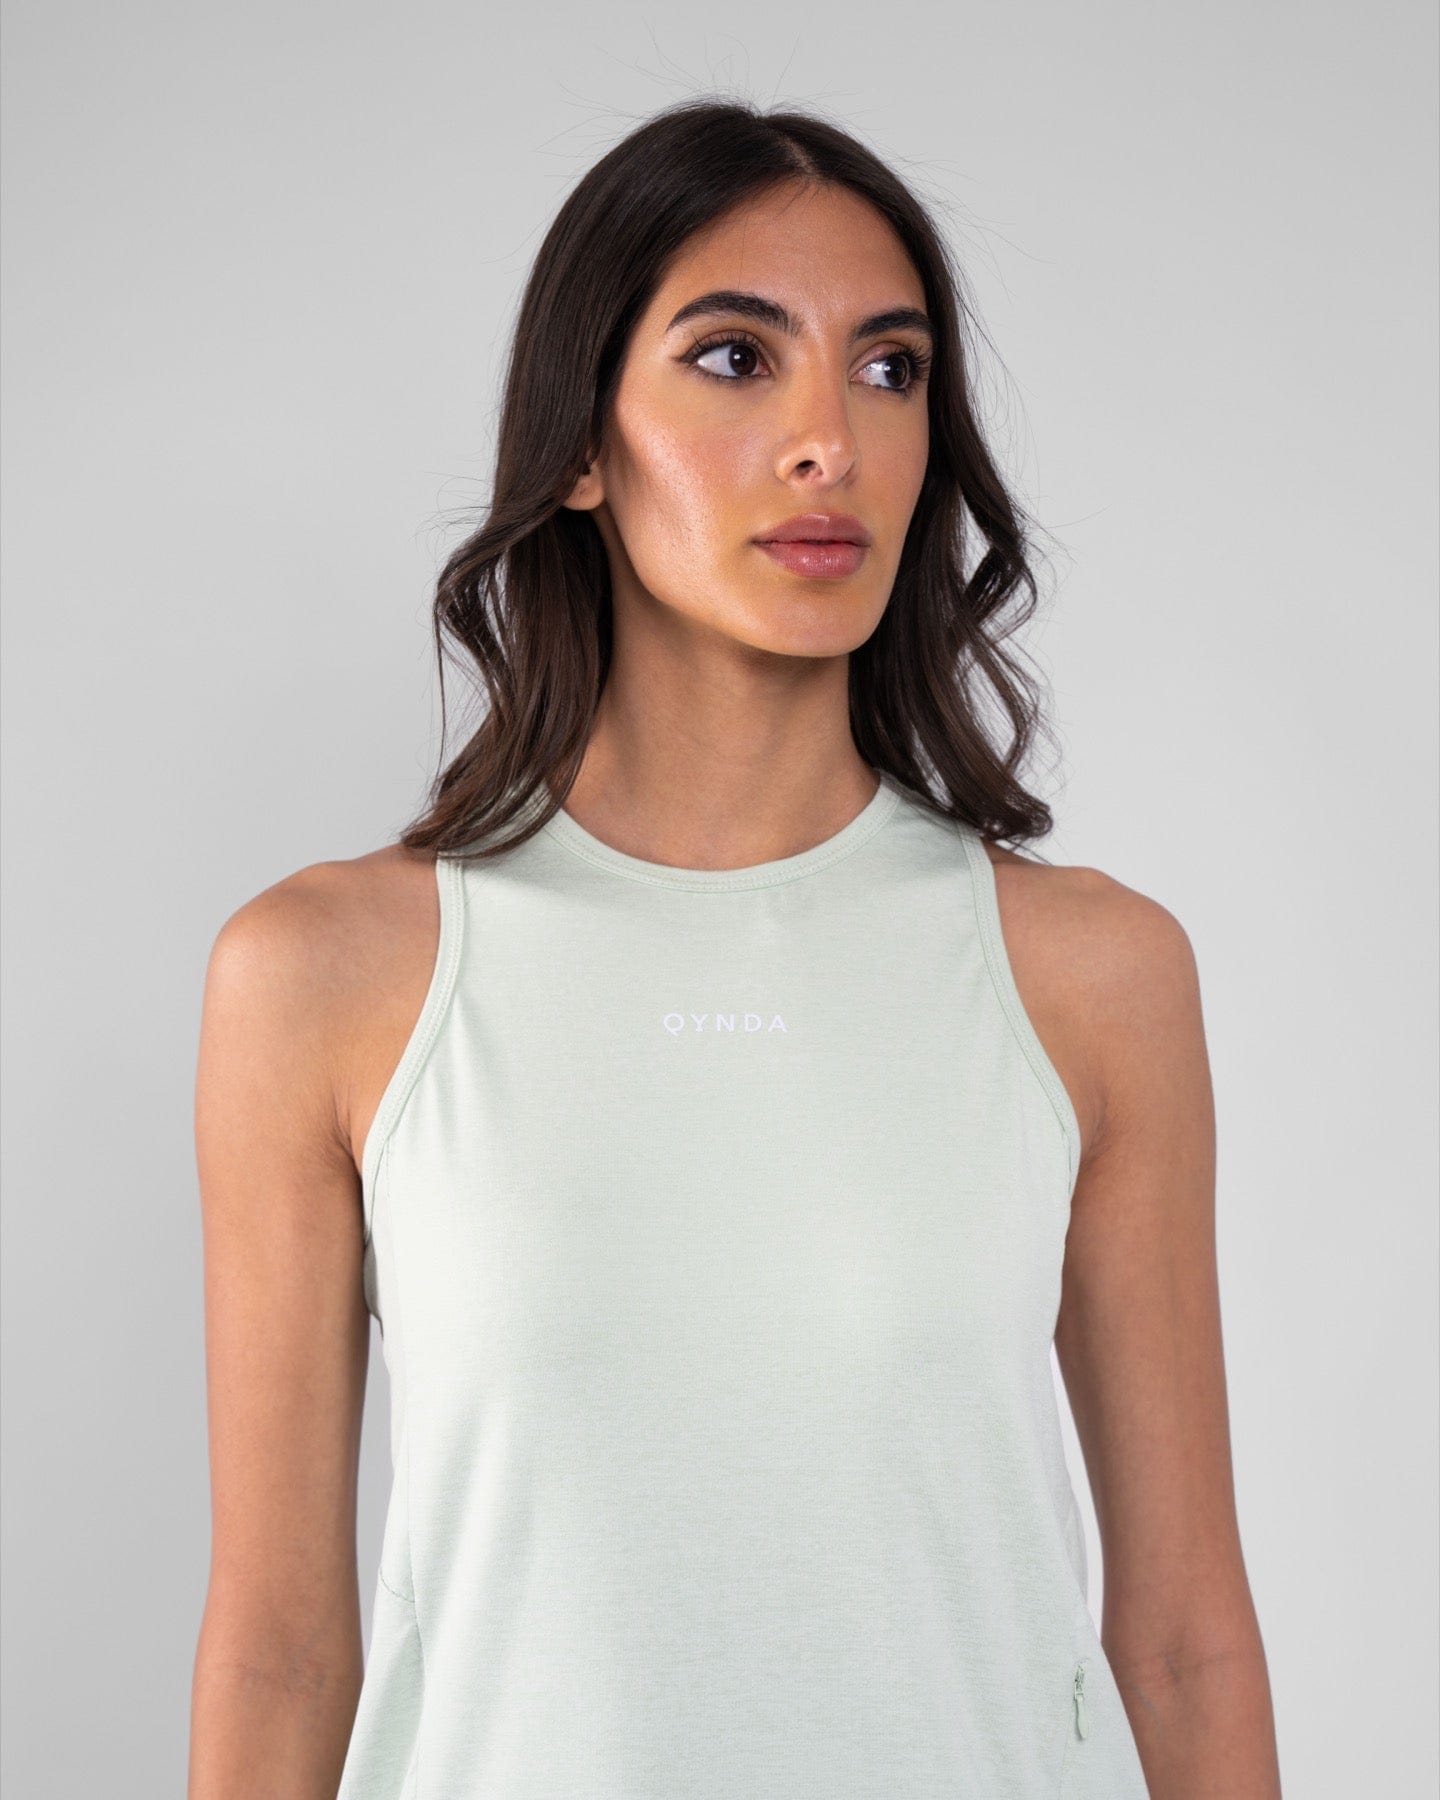 A woman with dark hair wearing a Sage sleeveless modest RUH TANK TOP made of brrr° material, featuring moisture resistance and rapid drying capabilities, with the brand "qynda" on it, looking.